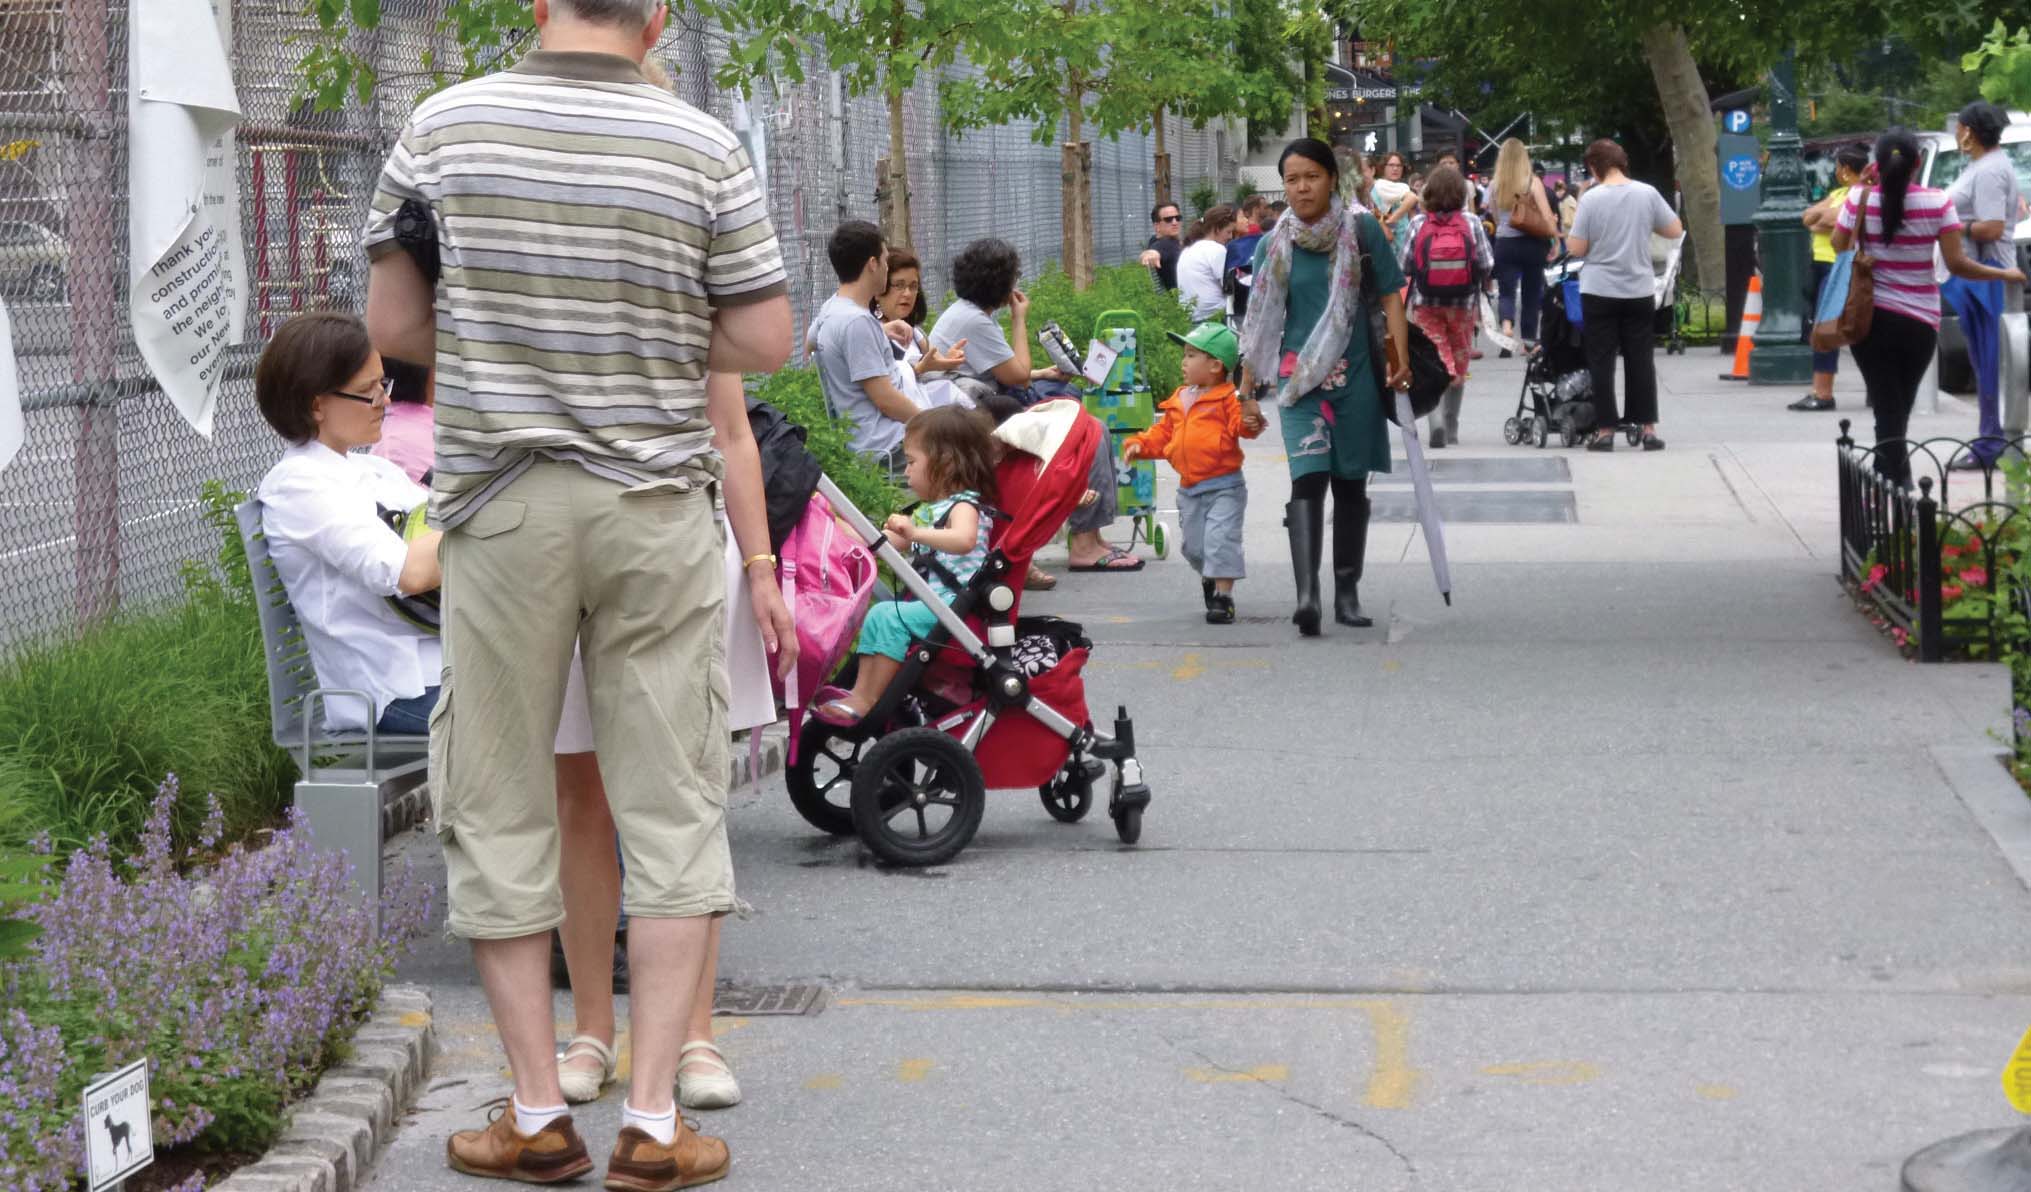 This stretch of Columbus Avenue between 76th and 77th in Manhattan was recently re-designed to foster community and green space (Photo courtesy of Street Design Manual 2013)